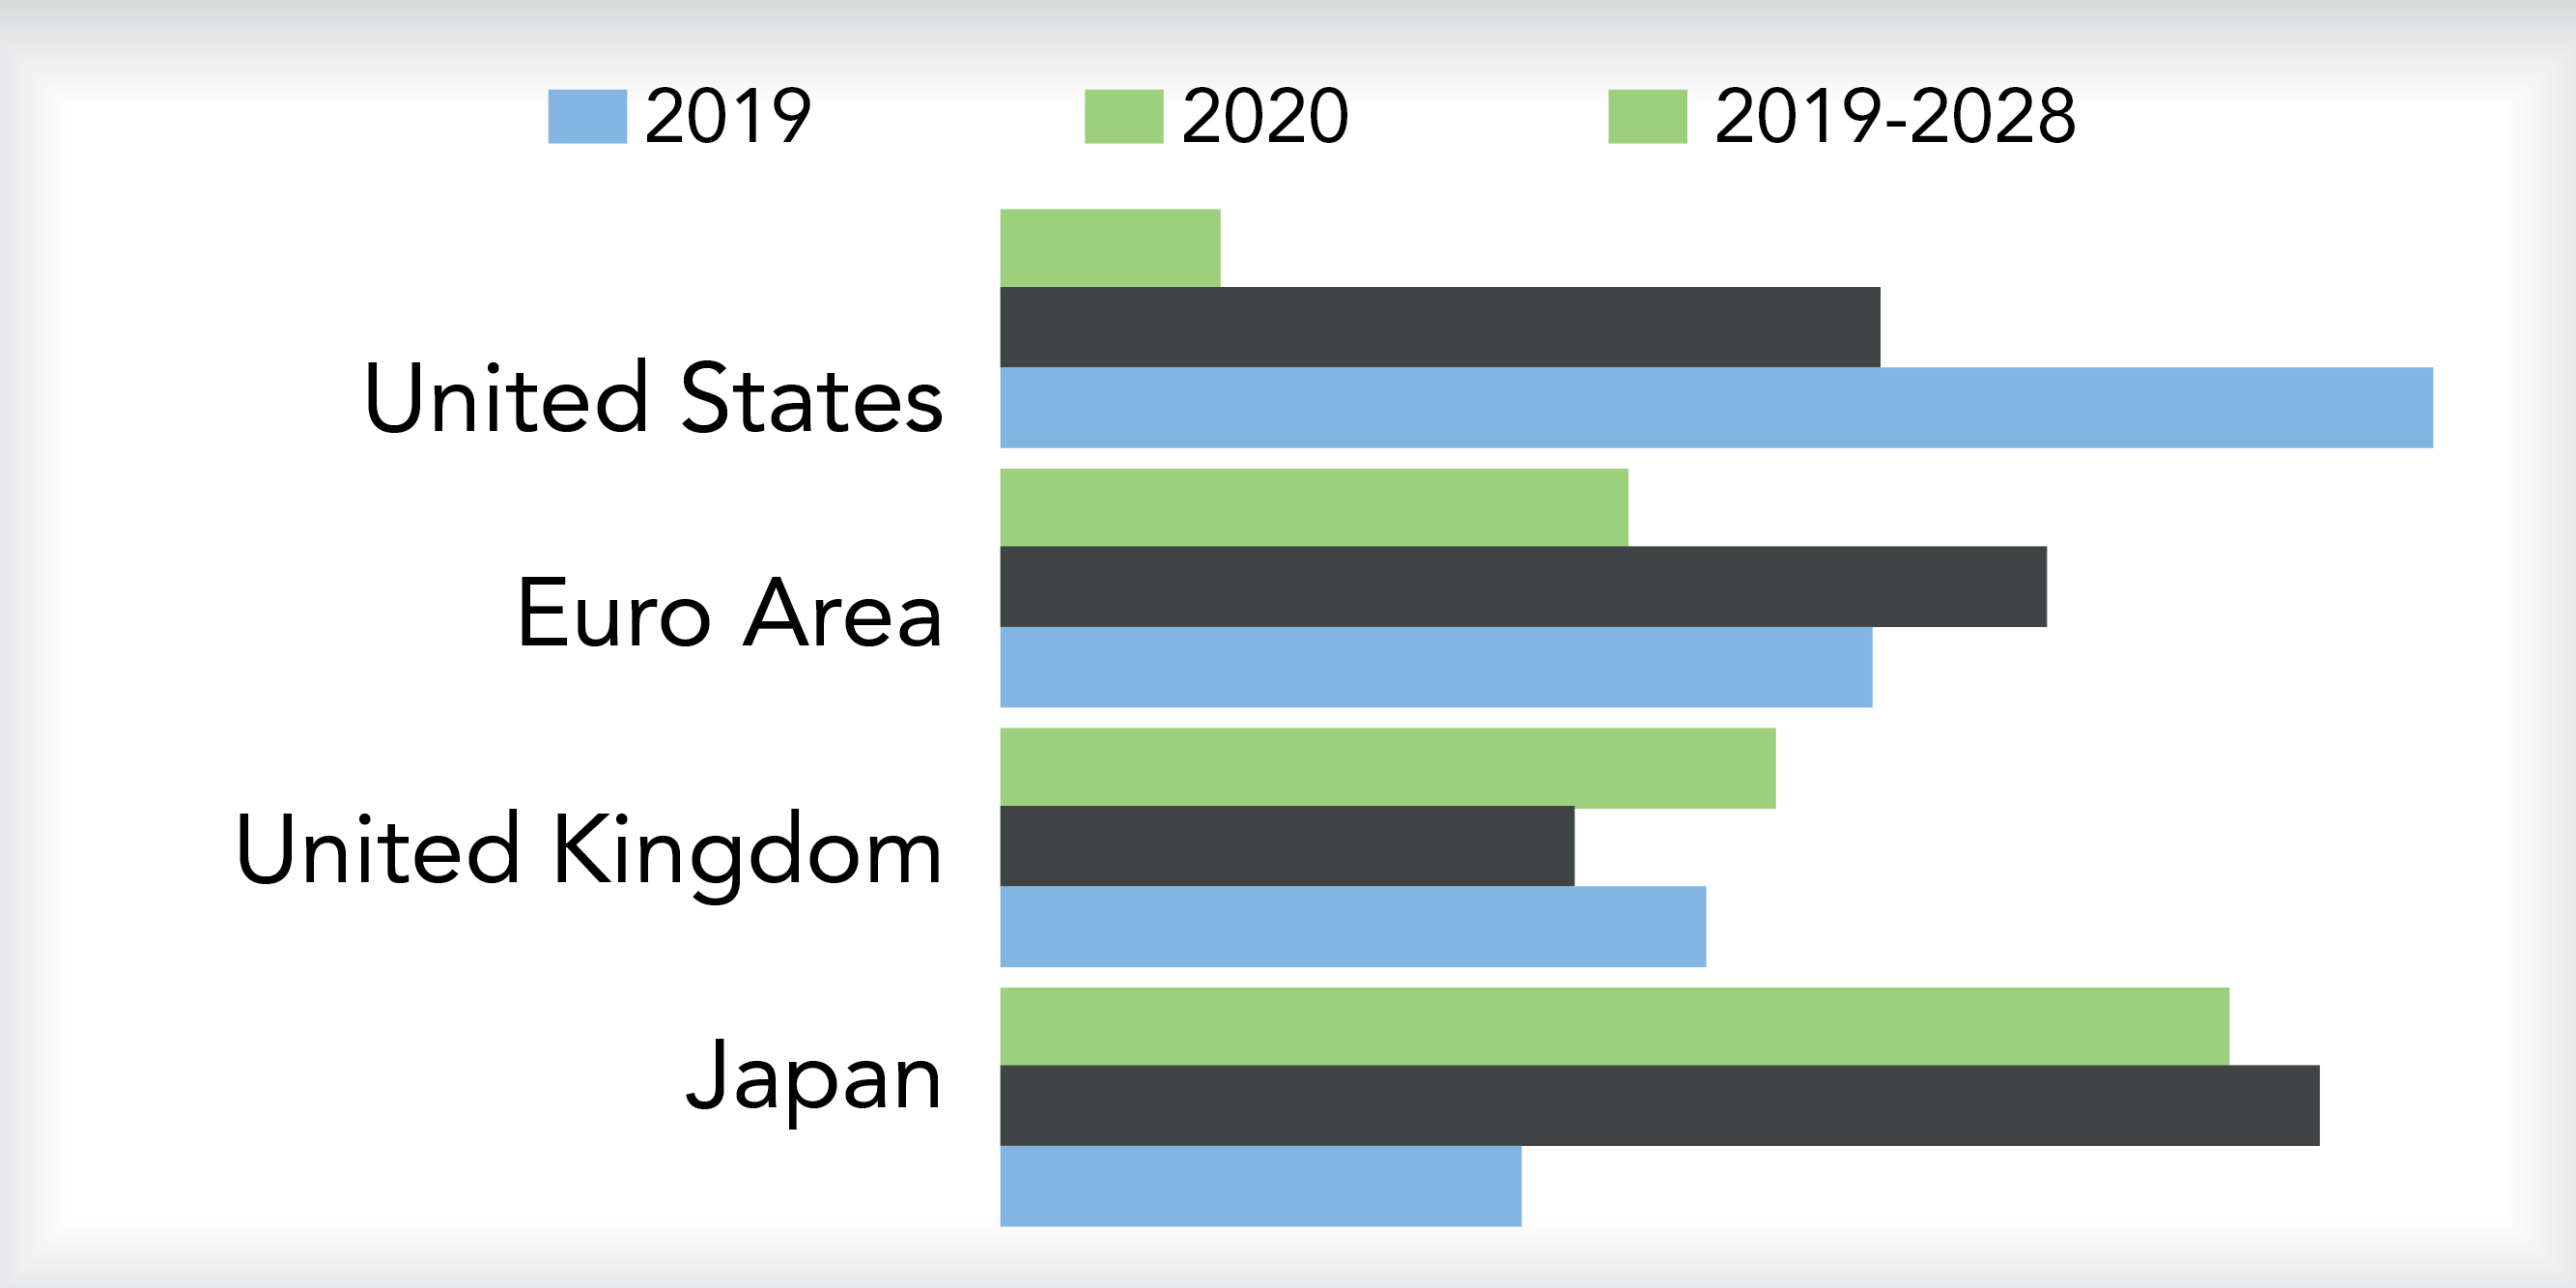 Growth of Gross Domestic Product, 2019-2028